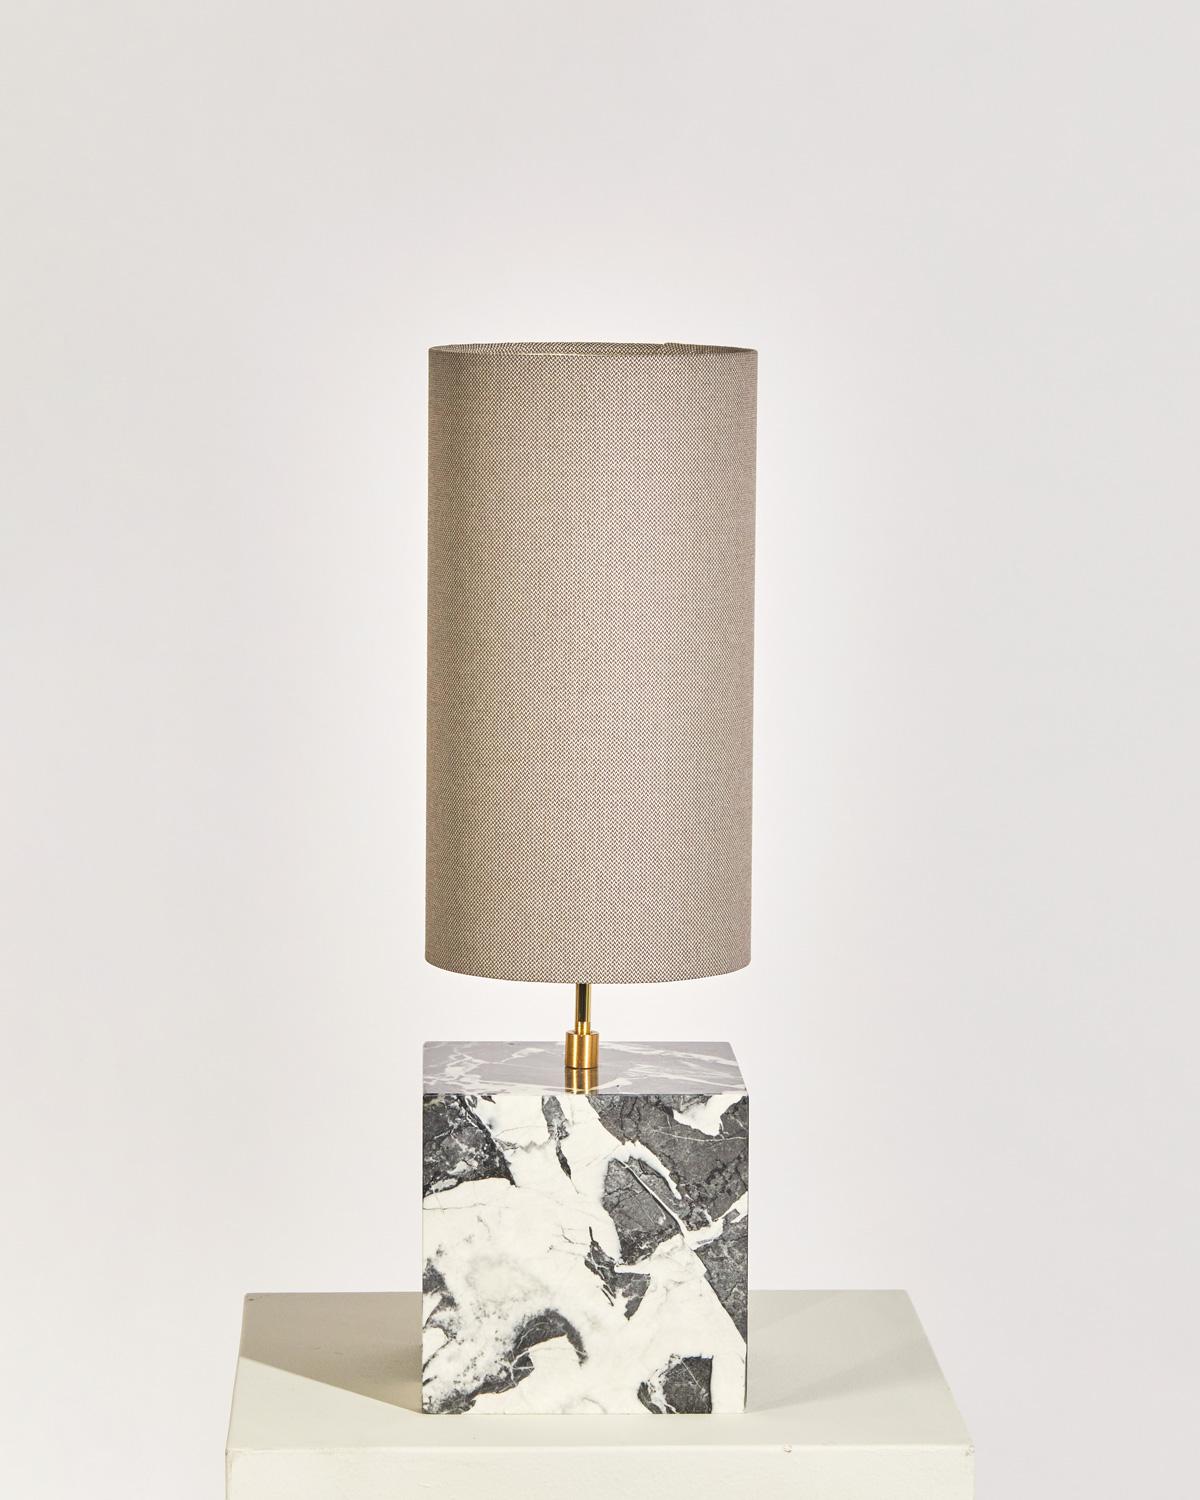 The Coexist table lamp consists of a marble cube base and a lampshade made from recycled fabric.

The lamp serves as a sculptural centerpiece for any room, emitting a soft warm light to draw the viewer into the materials. The bold geometry of the